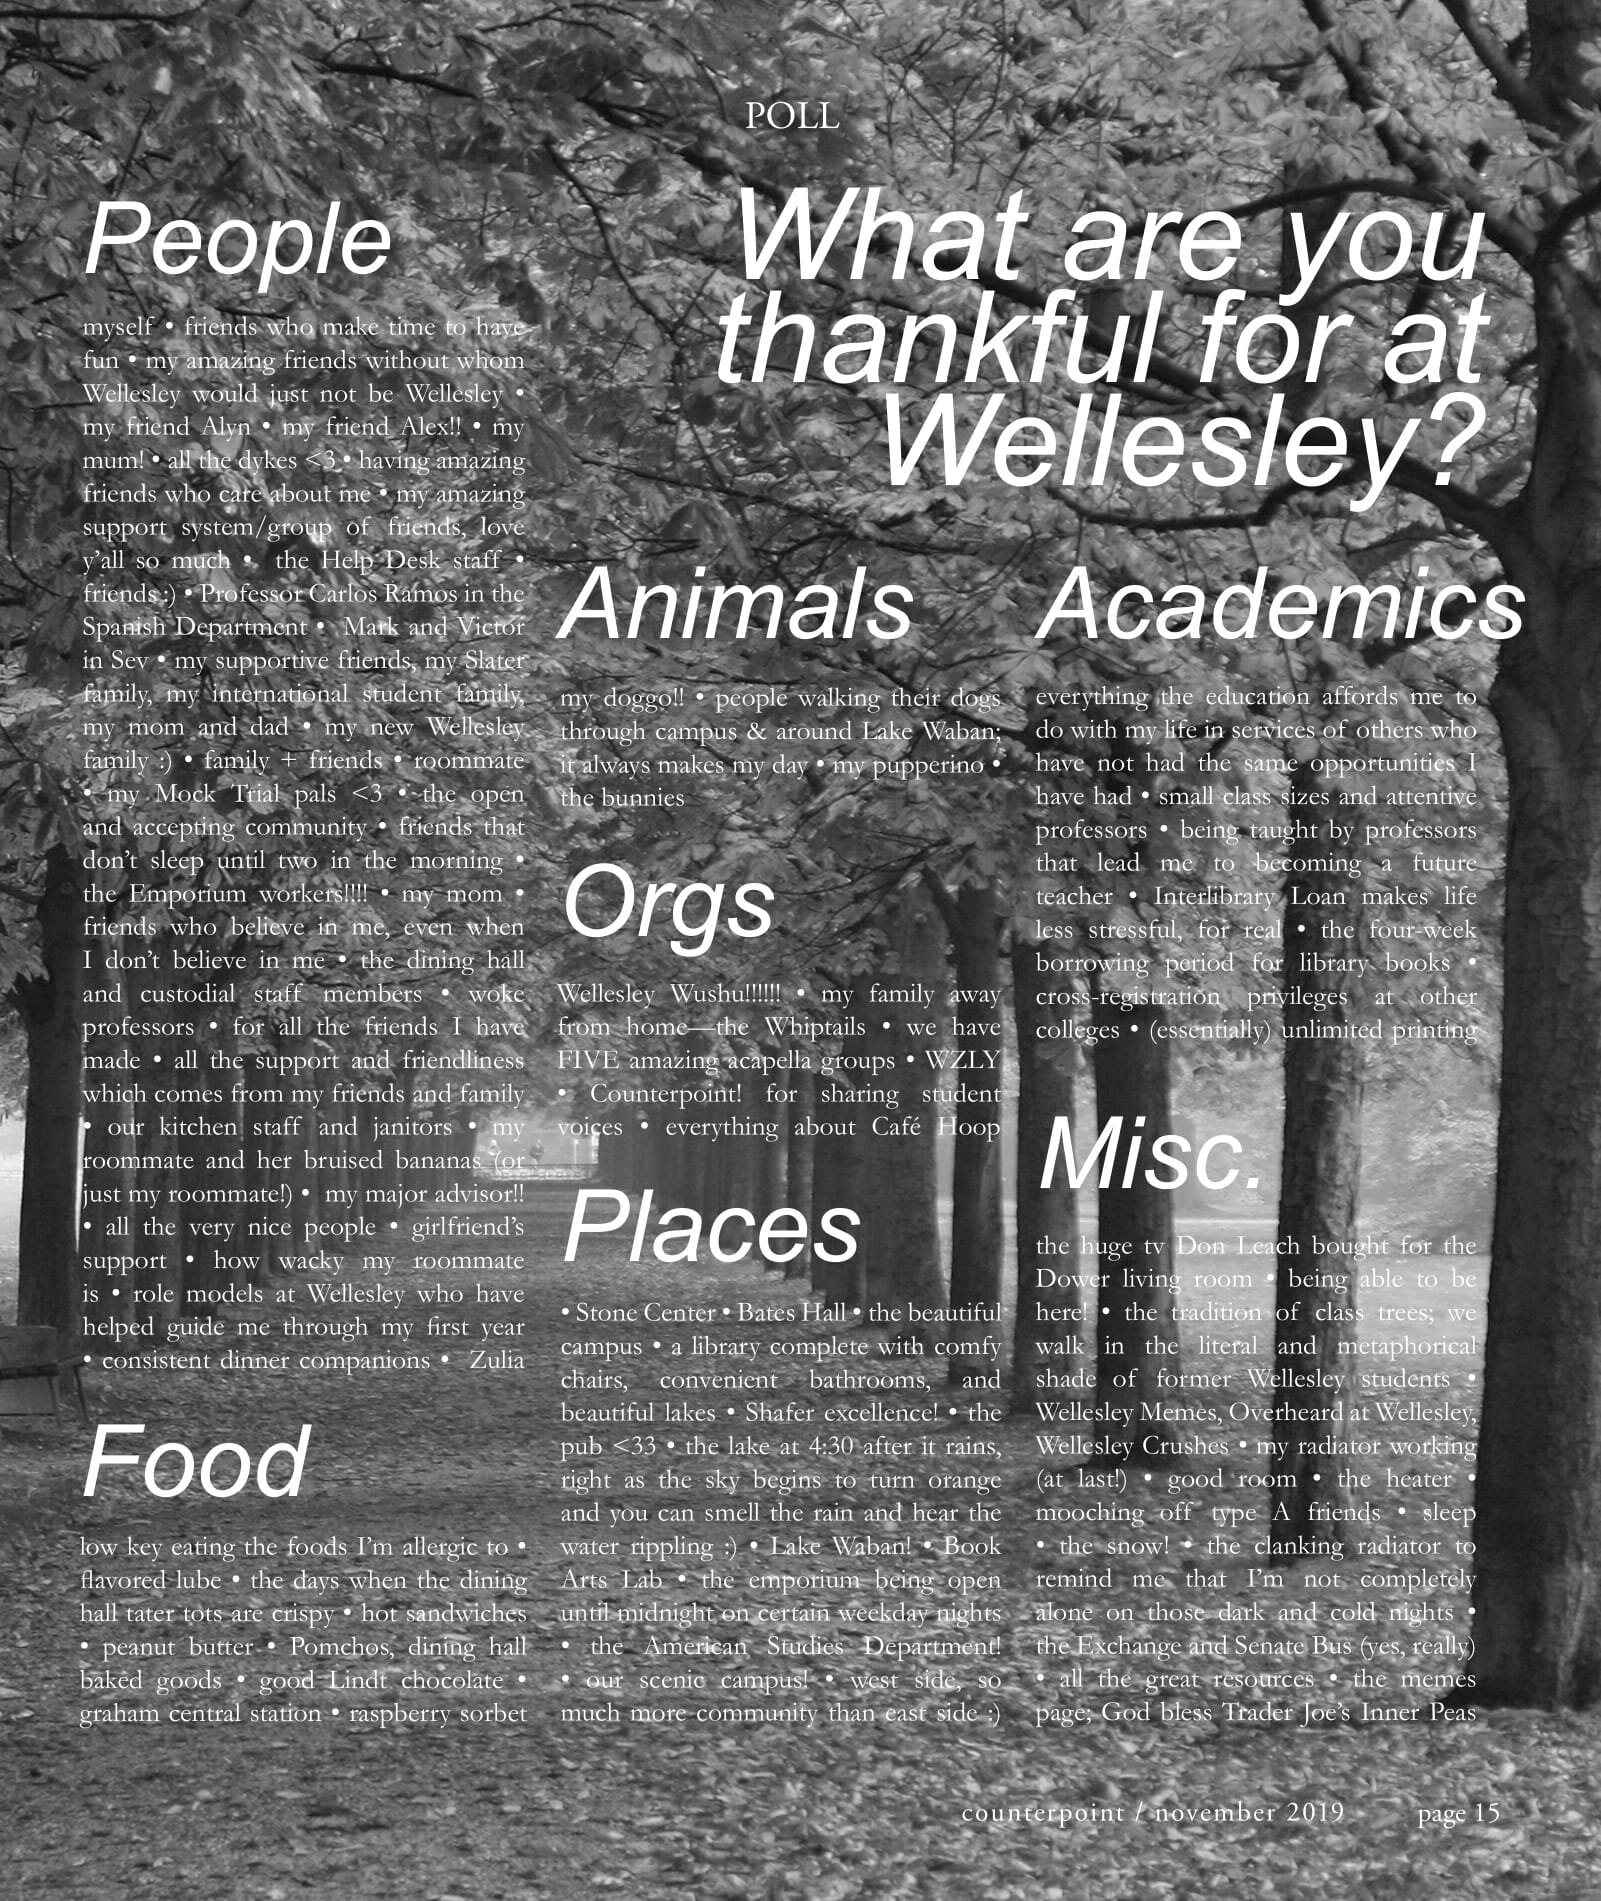 What We’re Thankful for at Wellesley